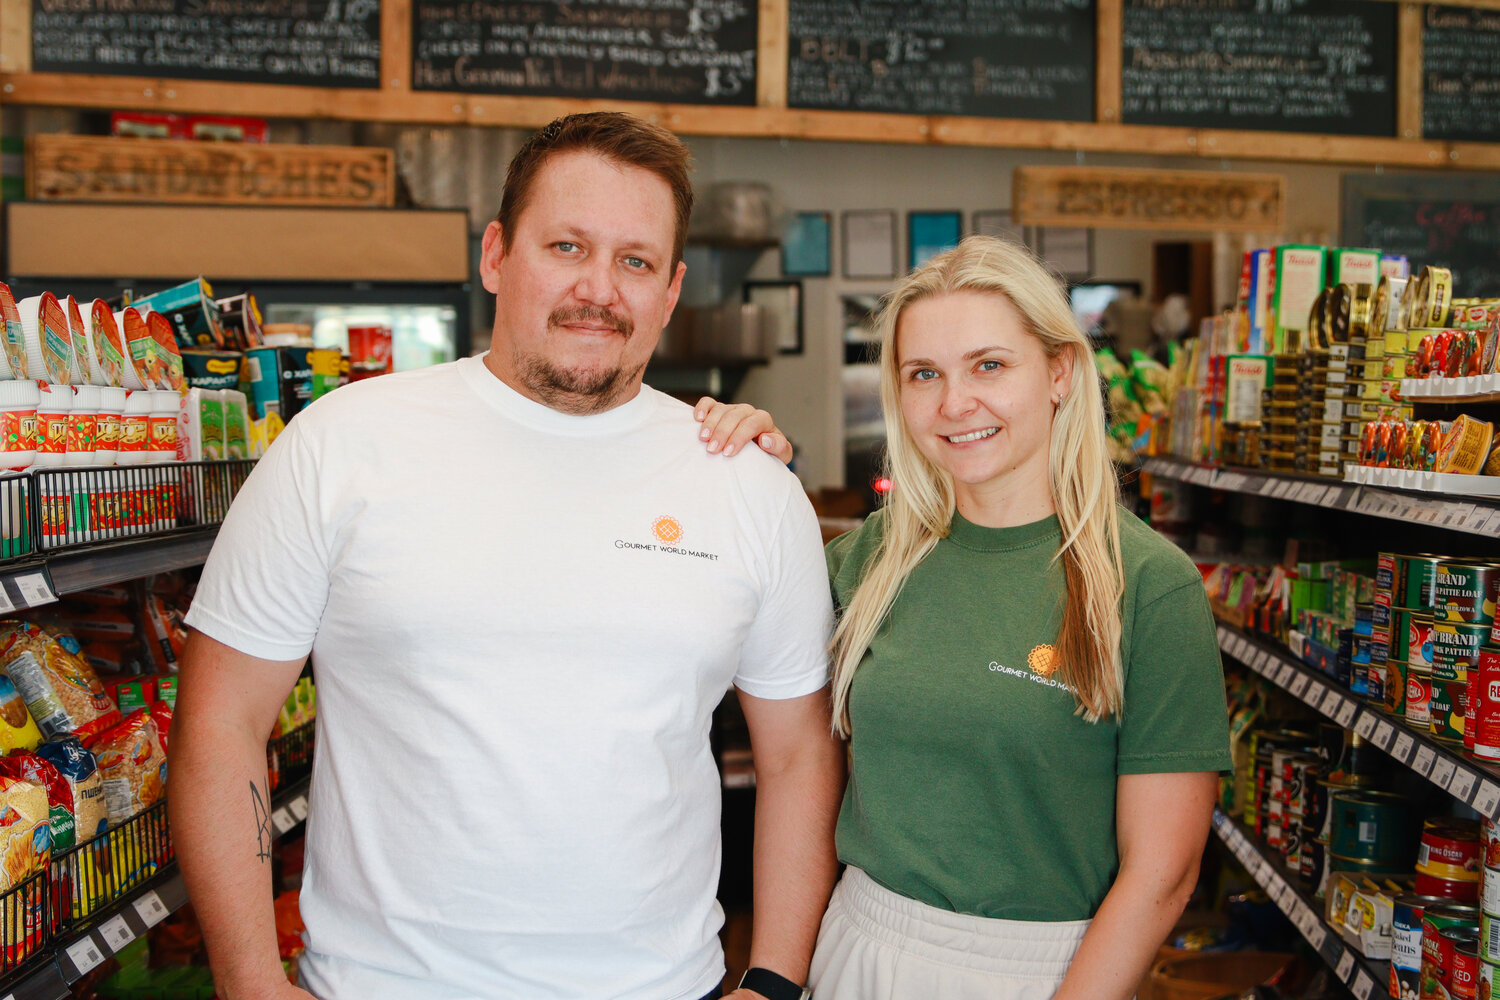 Owners of Gourmet World Market, Maksym Tsegelnyk (Left) and Iuliia Mulligan (Right), in store